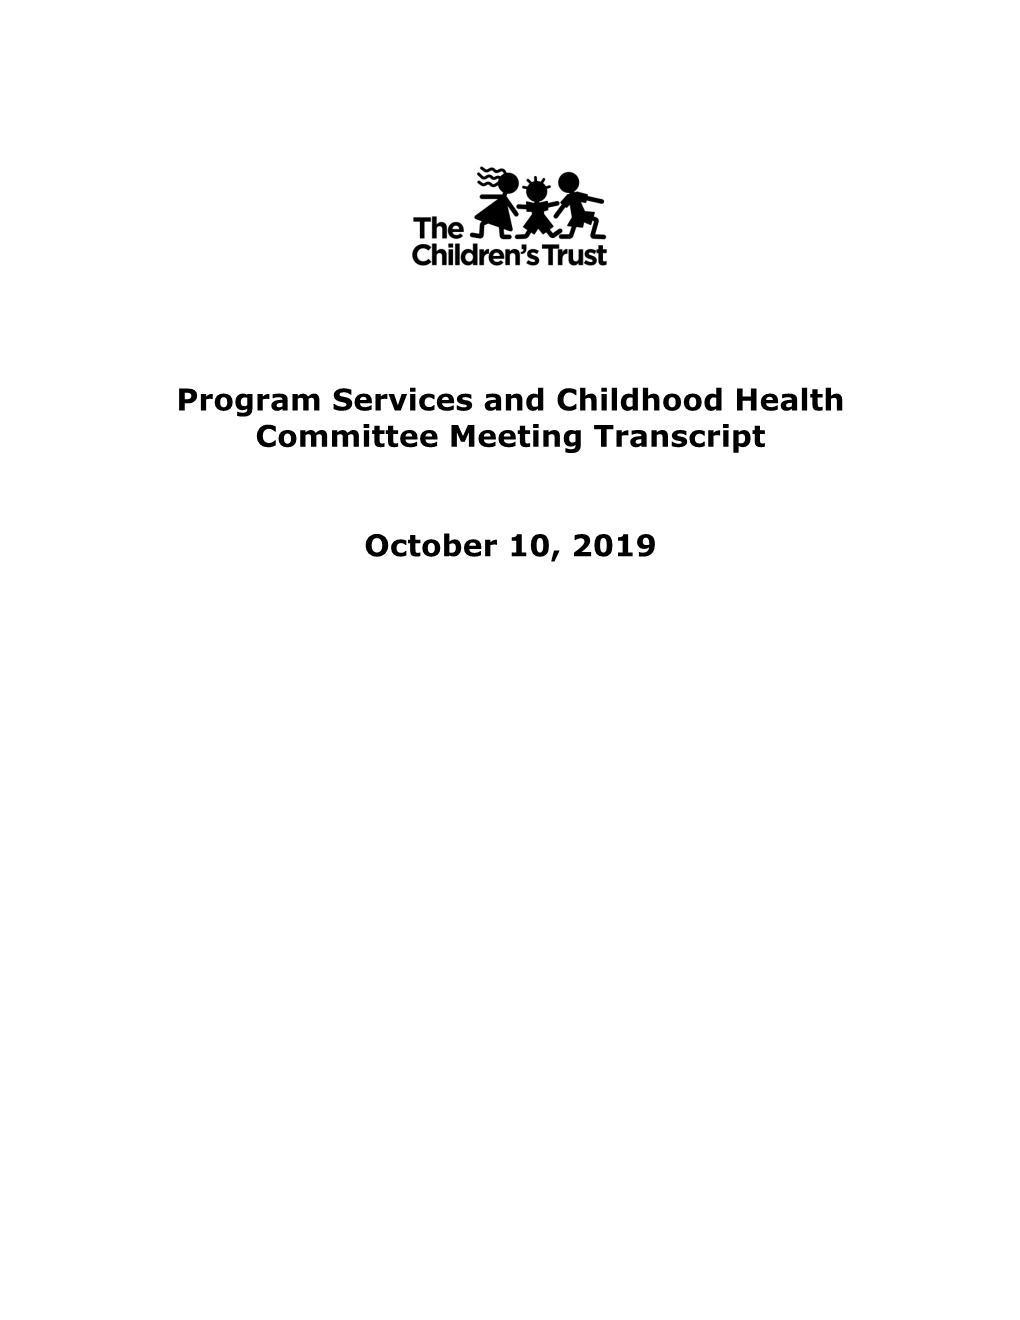 Program Services and Childhood Health Committee Meeting Transcript